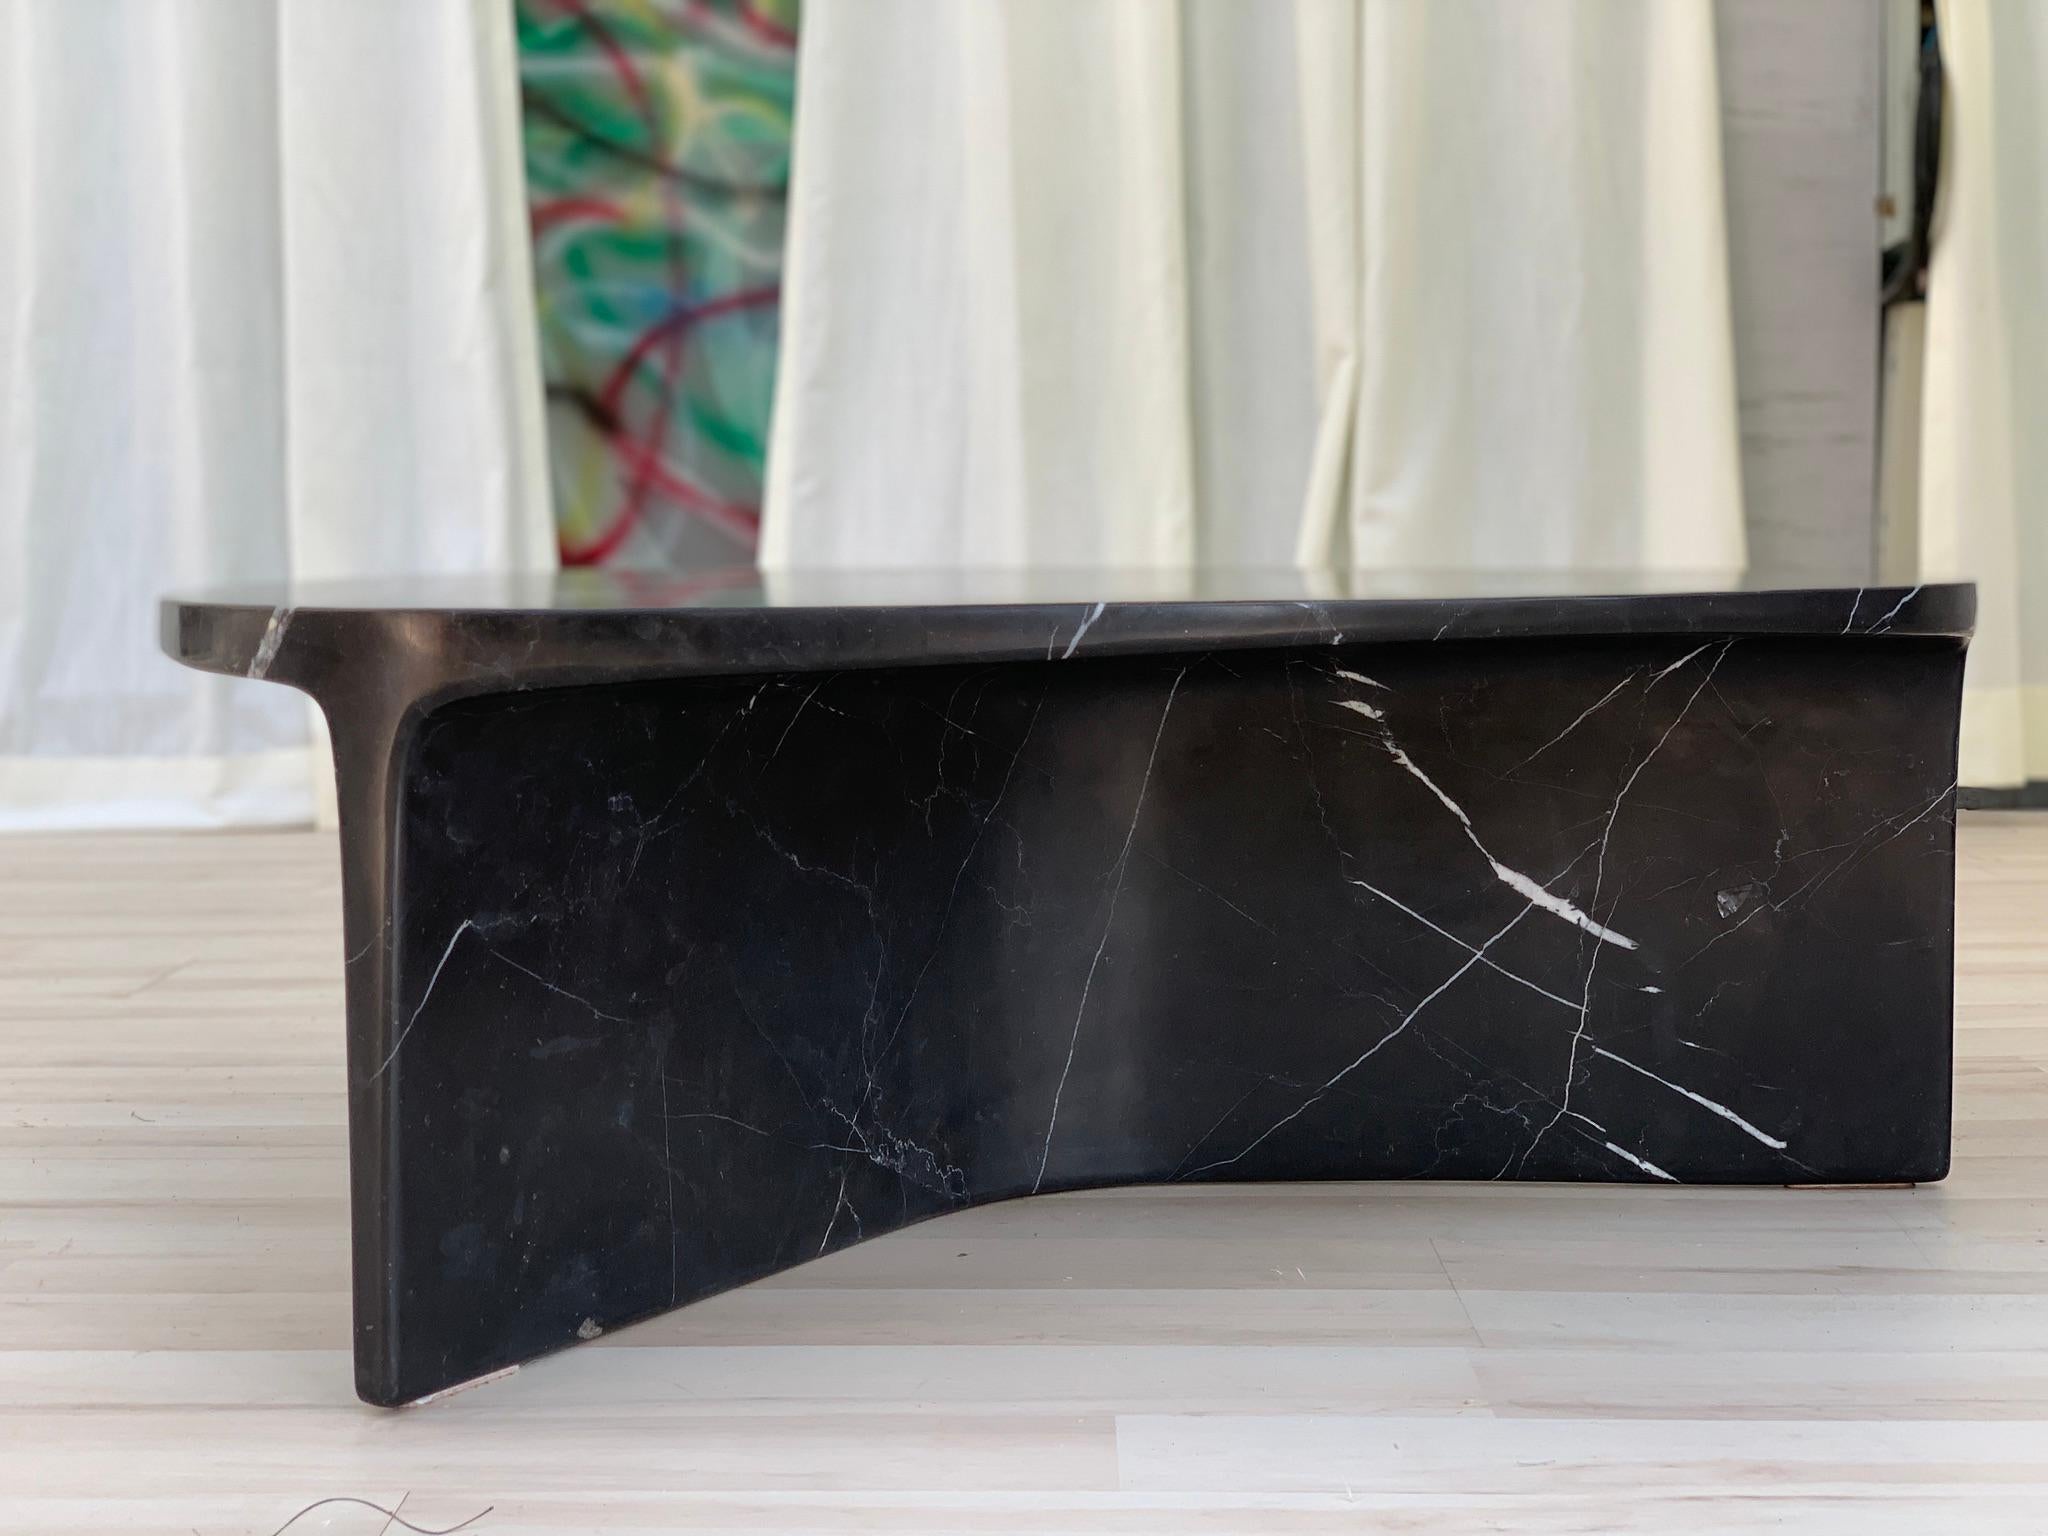 Carv coffee table is Cut from a single block of Black Nero Marquina marble.
Essential and organic design, naturally creating a flat tabletop flowing
to a Y - shaped foot, revealing the stone’s veins
from the exterior surface through to it’s